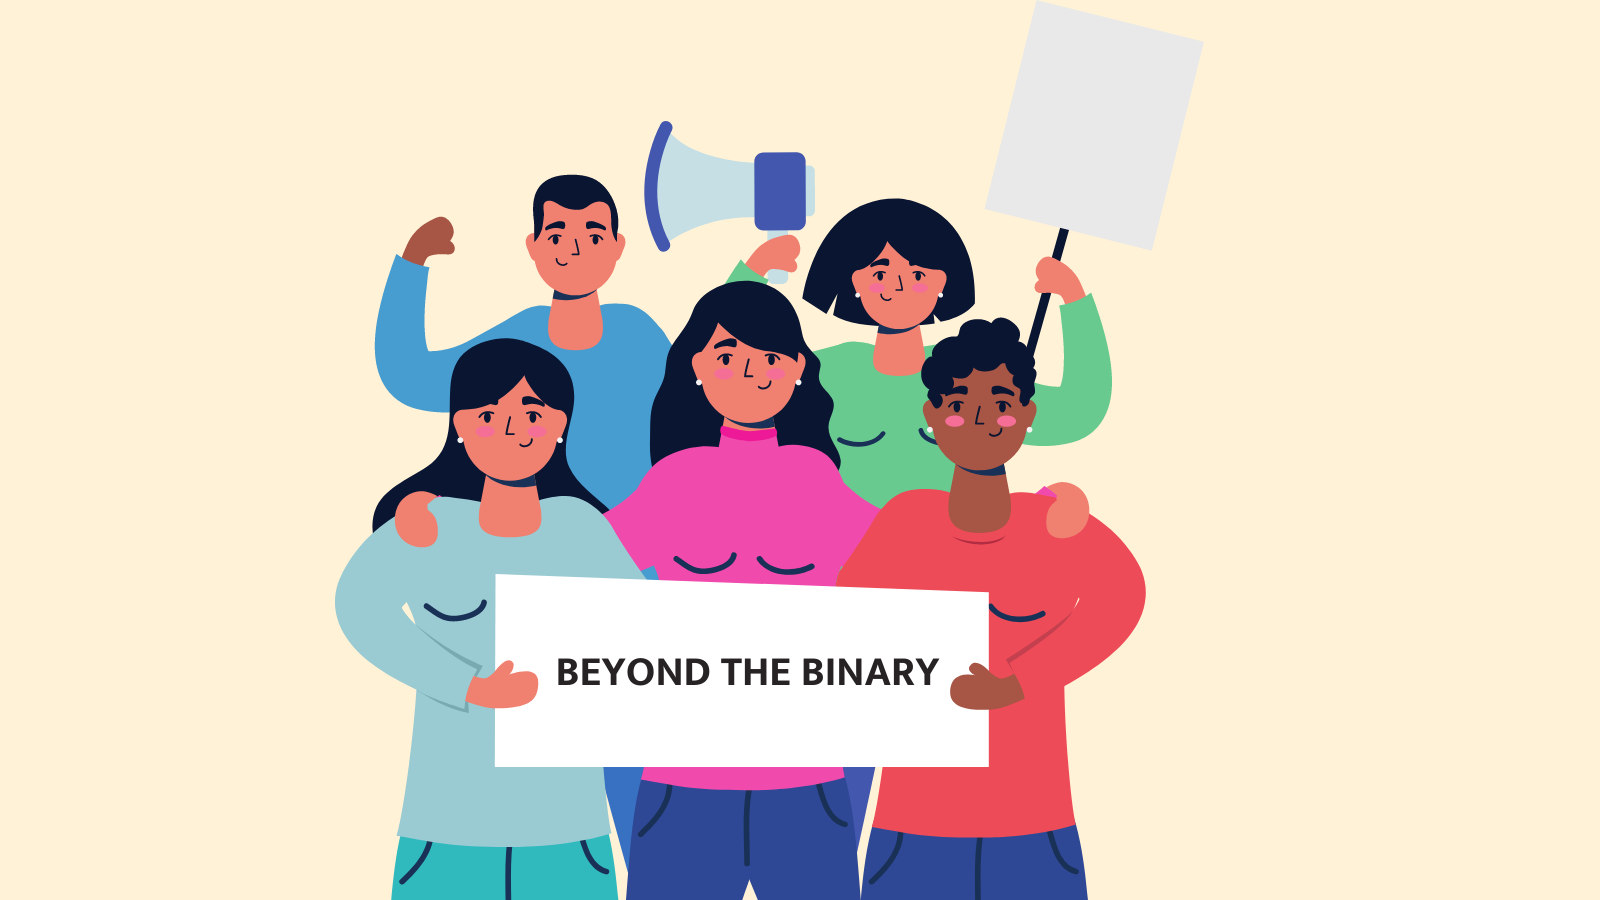 cartoon people hold a sign that says "beyond the binary"